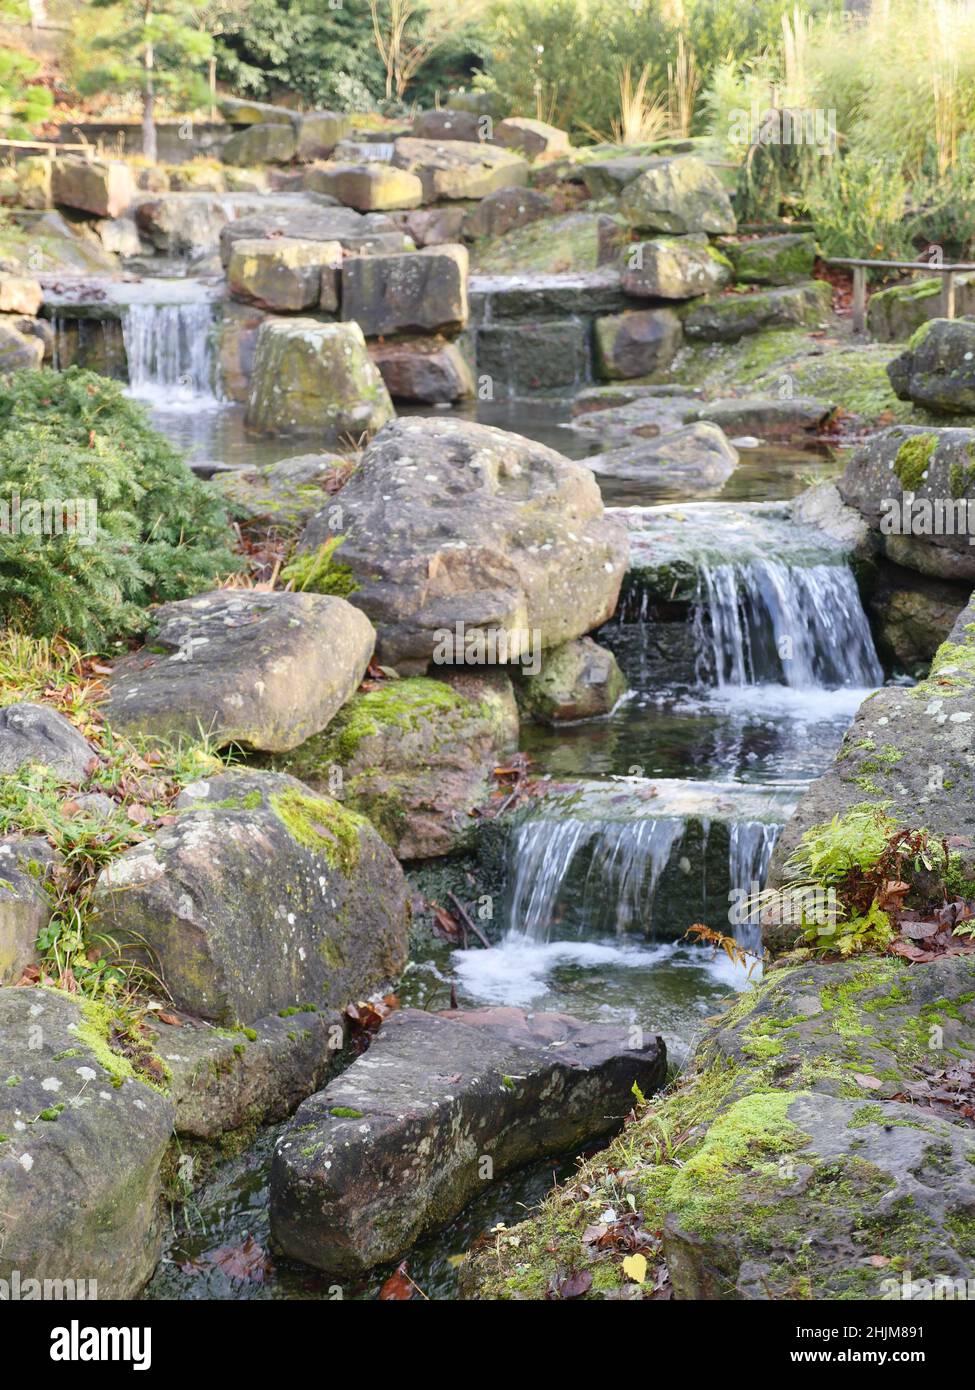 Small creek flows through a rocky environment, blurred background. The stones are partly overgrown with moss Stock Photo